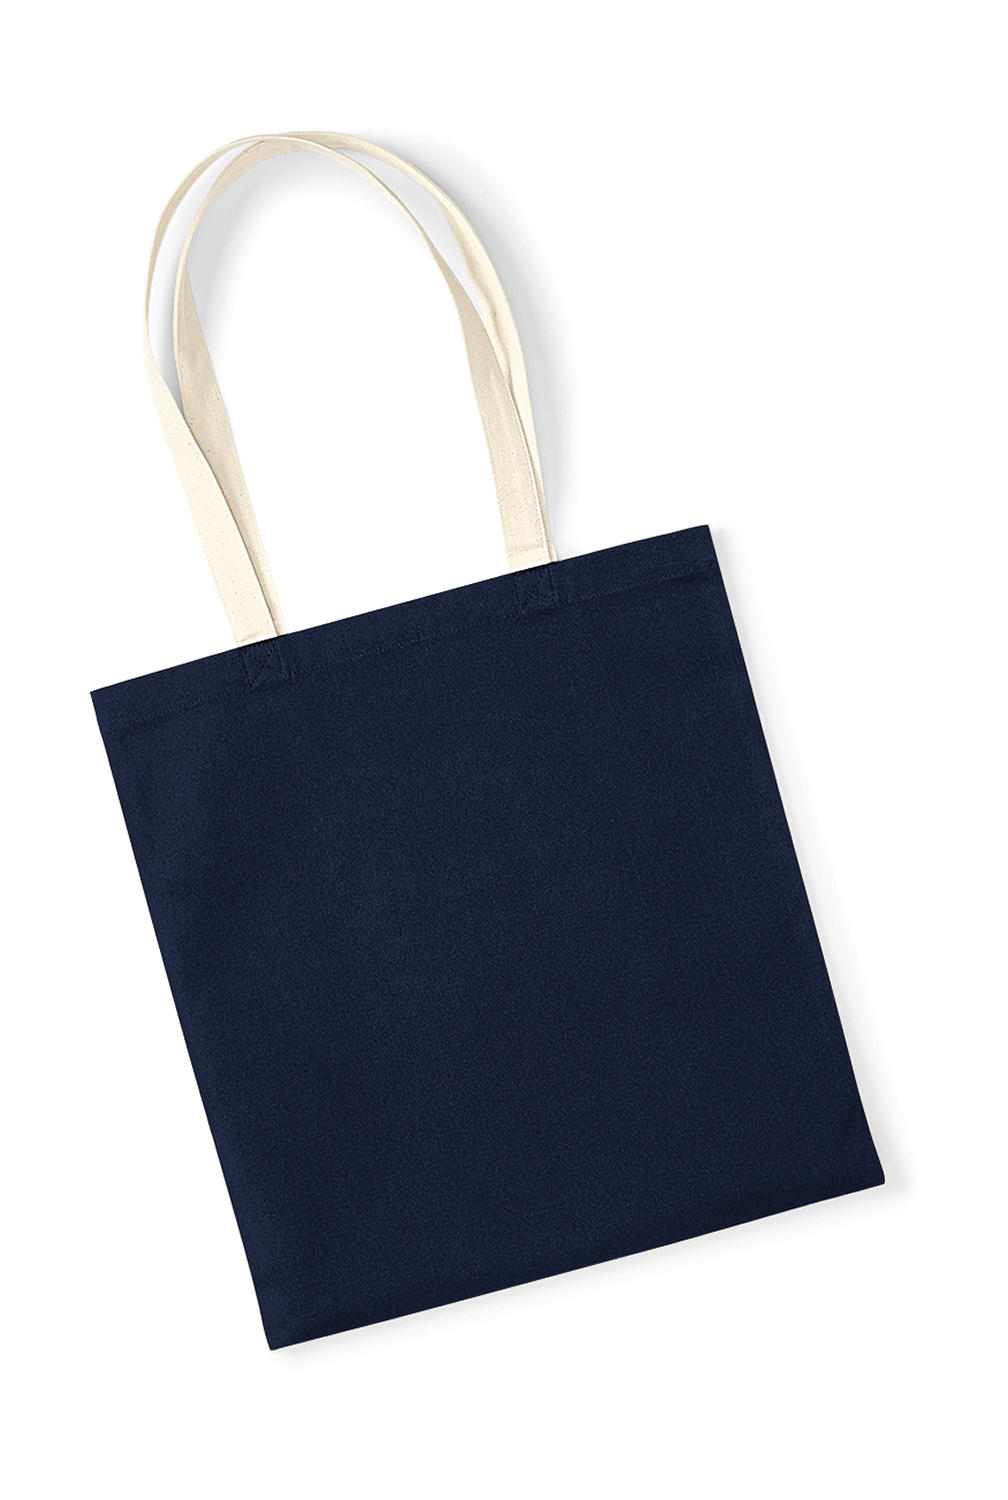  EarthAware? Organic Bag for Life - Contrast Handle in Farbe French Navy/Natural